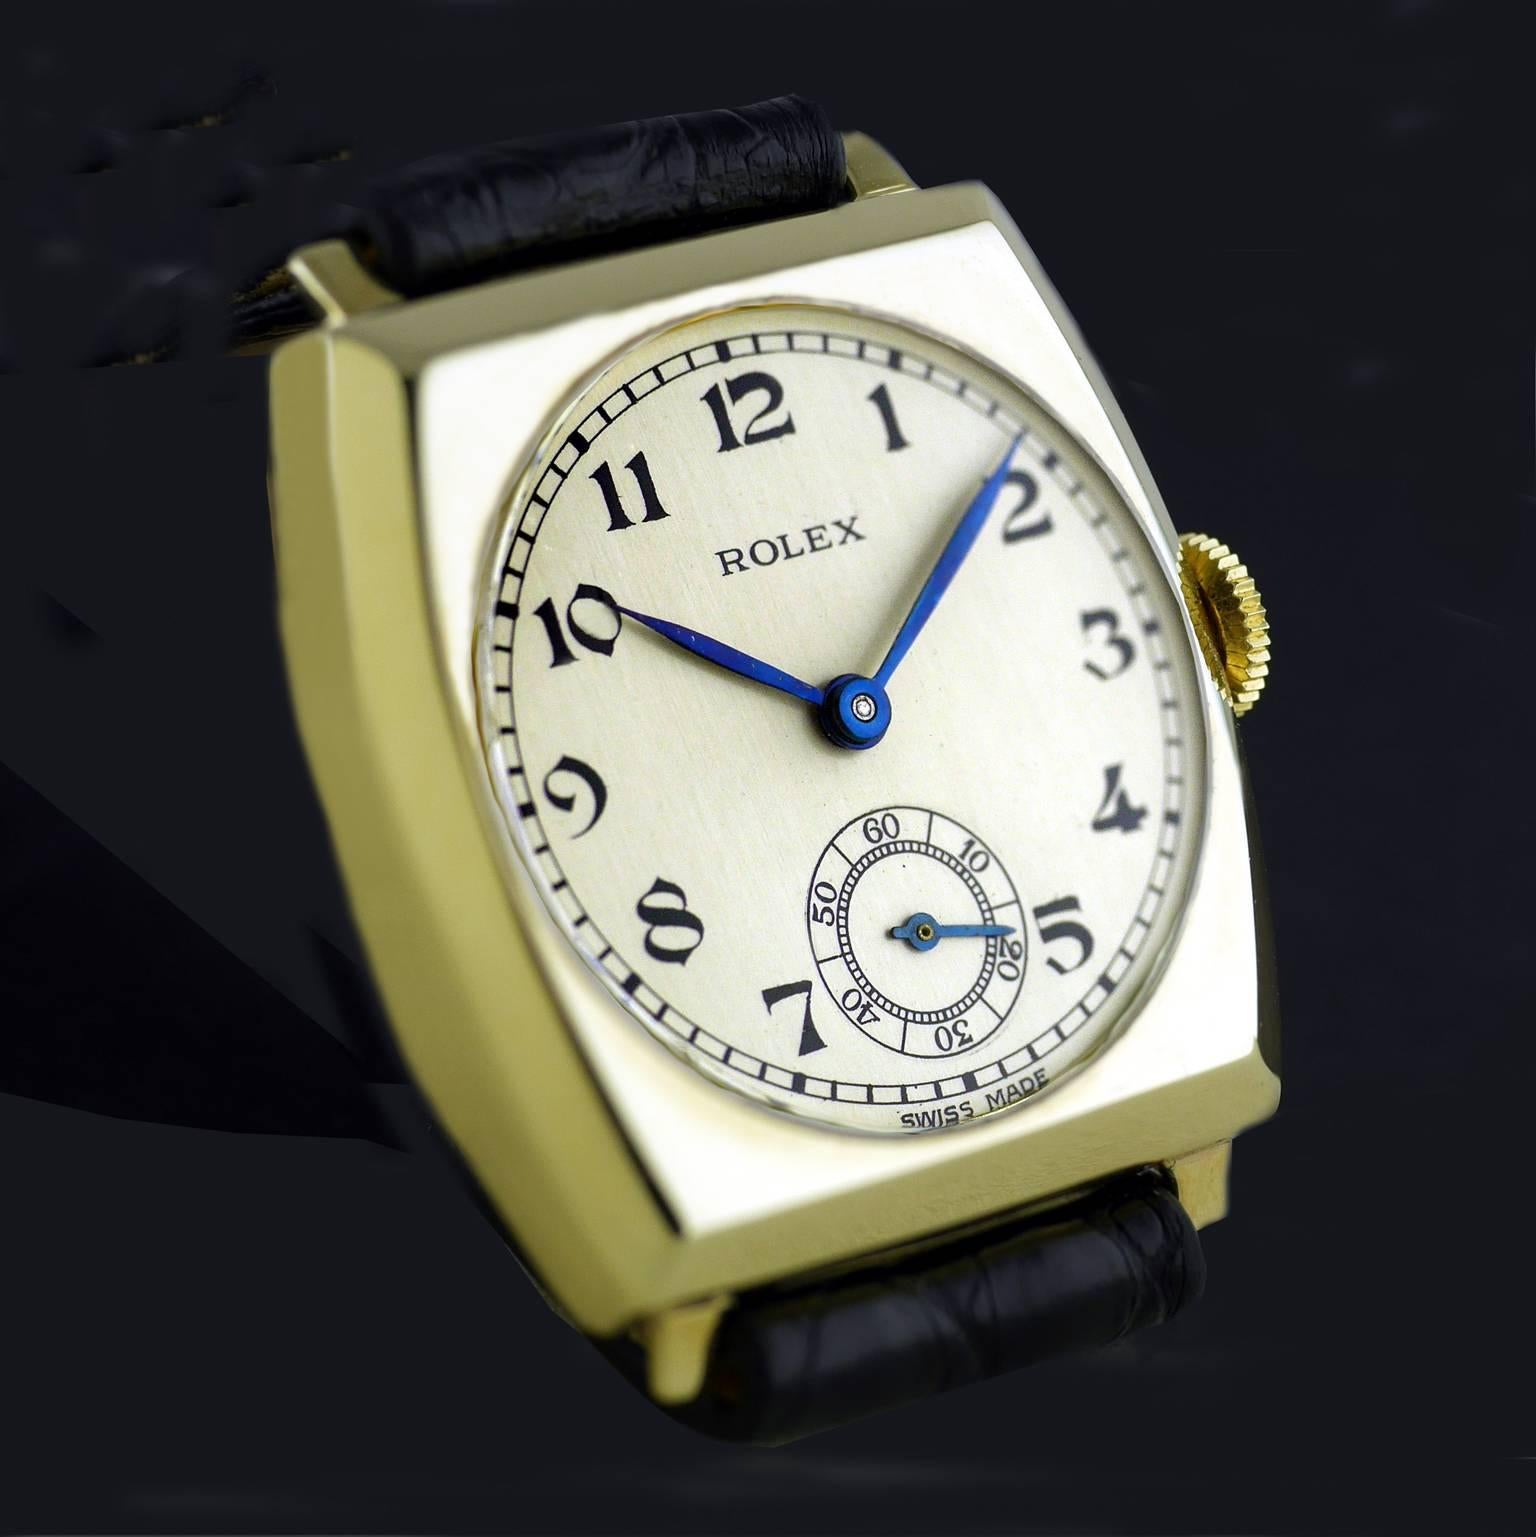 An Art Deco vintage wristwatch by Rolex made in 1937.

Gold tonneau cushion shaped case marked with Rolex and the “RWC Ltd” lozenge for the Rolex Watch Company Ltd. The snap back gold case is hallmarked for Glasgow Import into the United Kingdom in